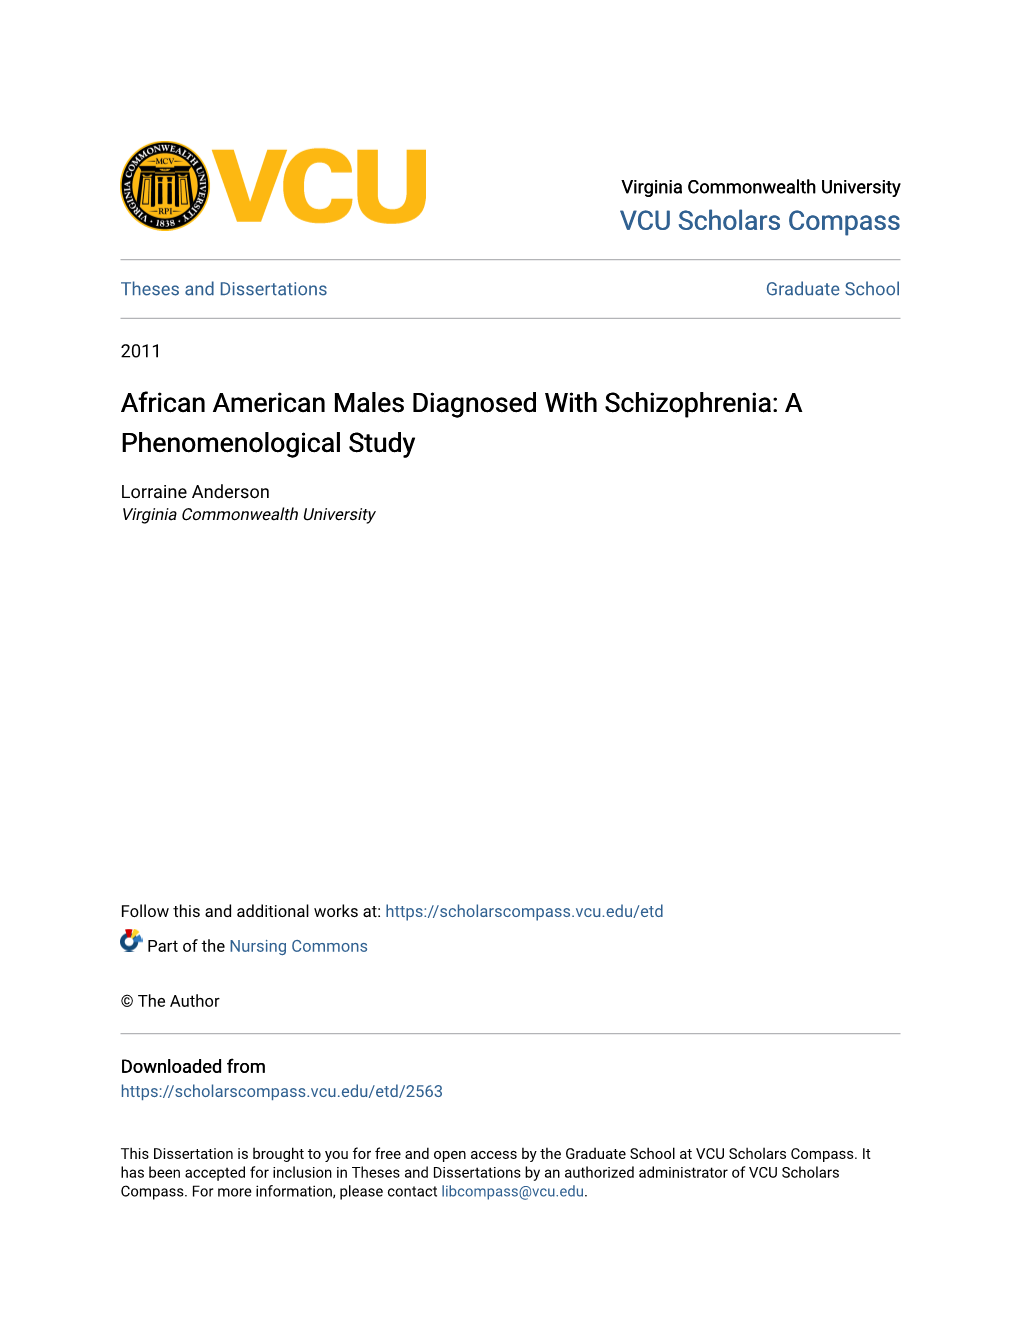 African American Males Diagnosed with Schizophrenia: a Phenomenological Study